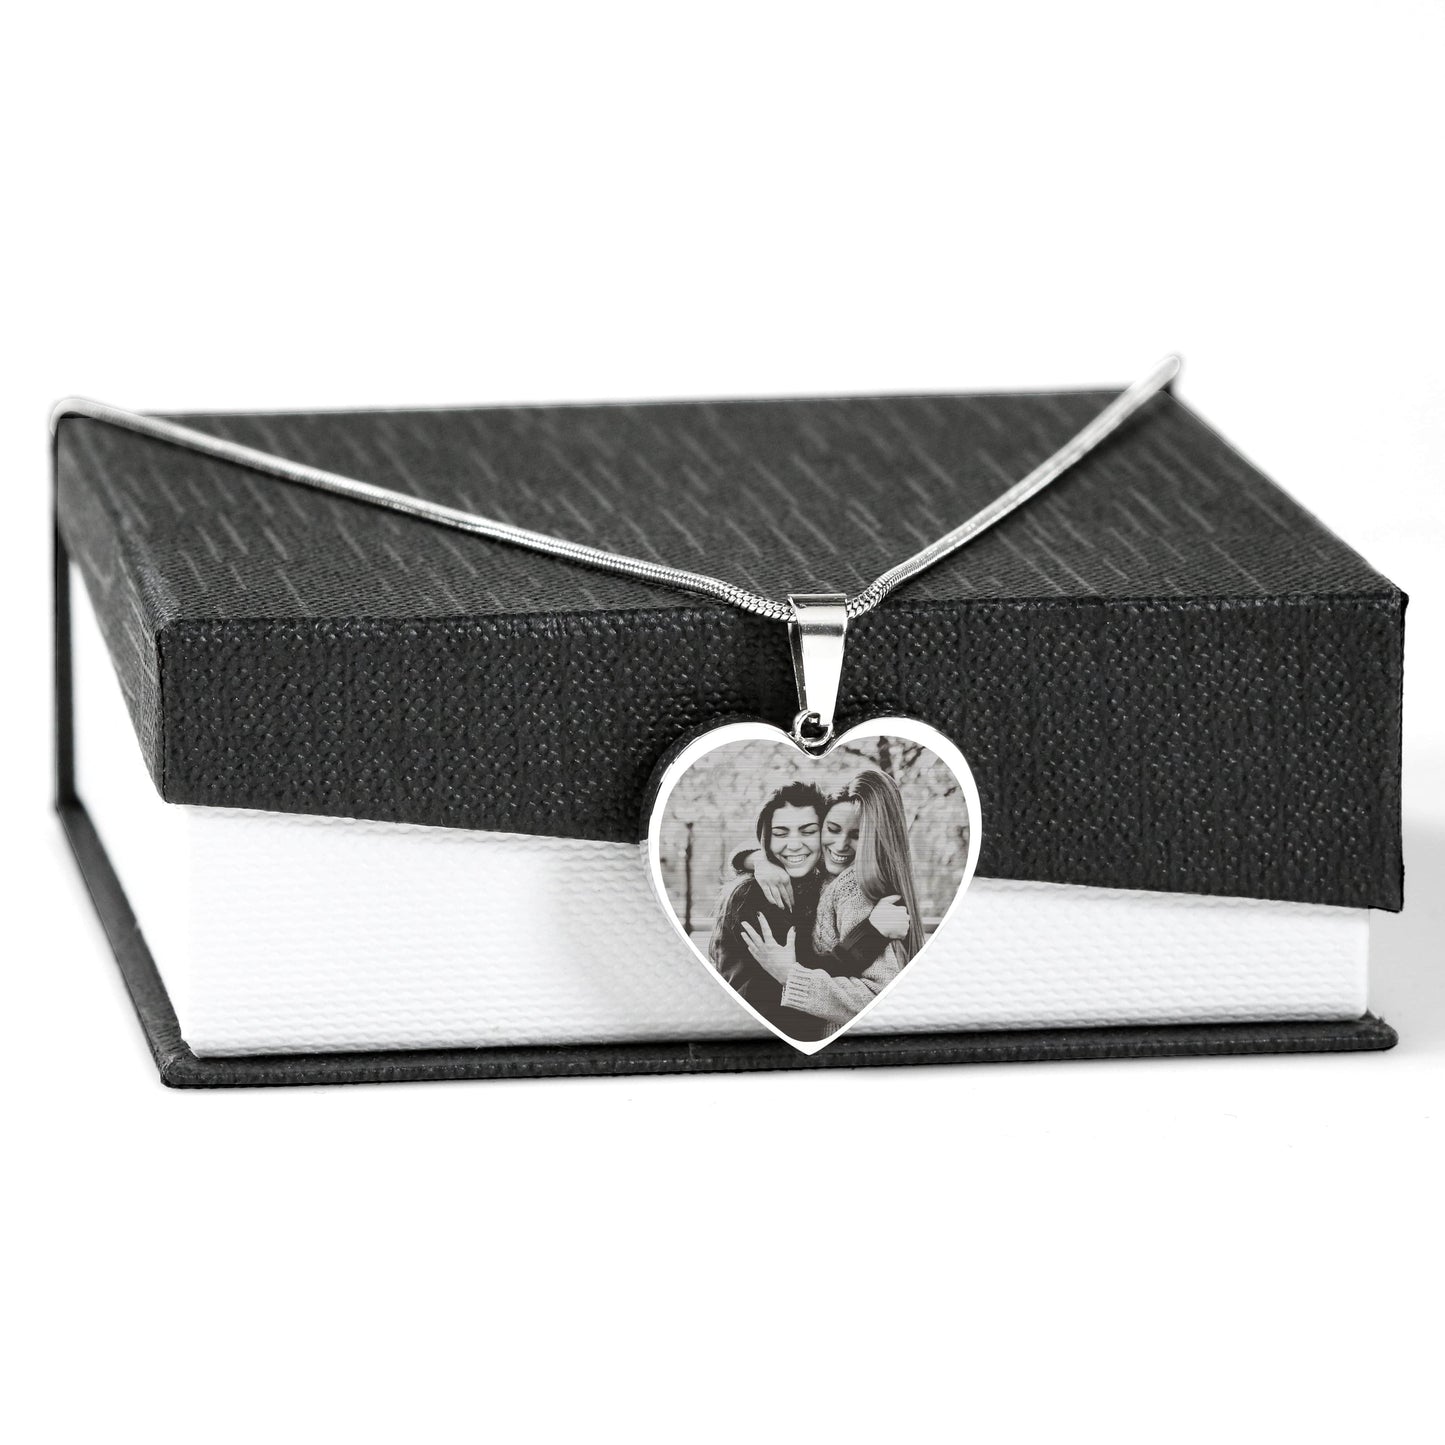 Personalized Photo Etched Heart Necklace